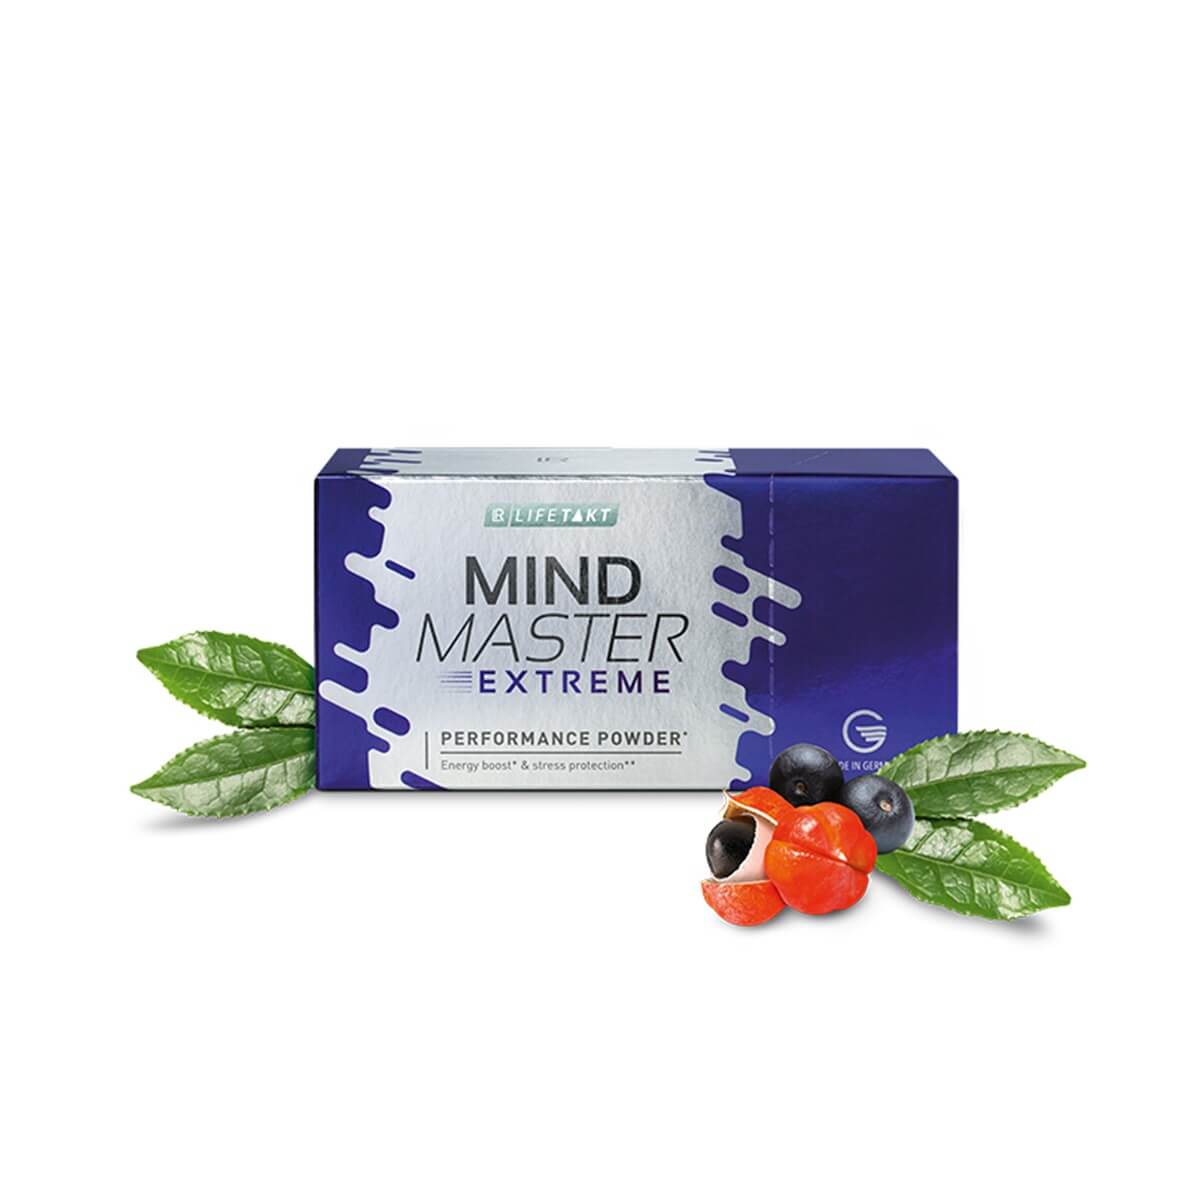 Booster Energie Mind Master Extreme formule poudre anti-stress